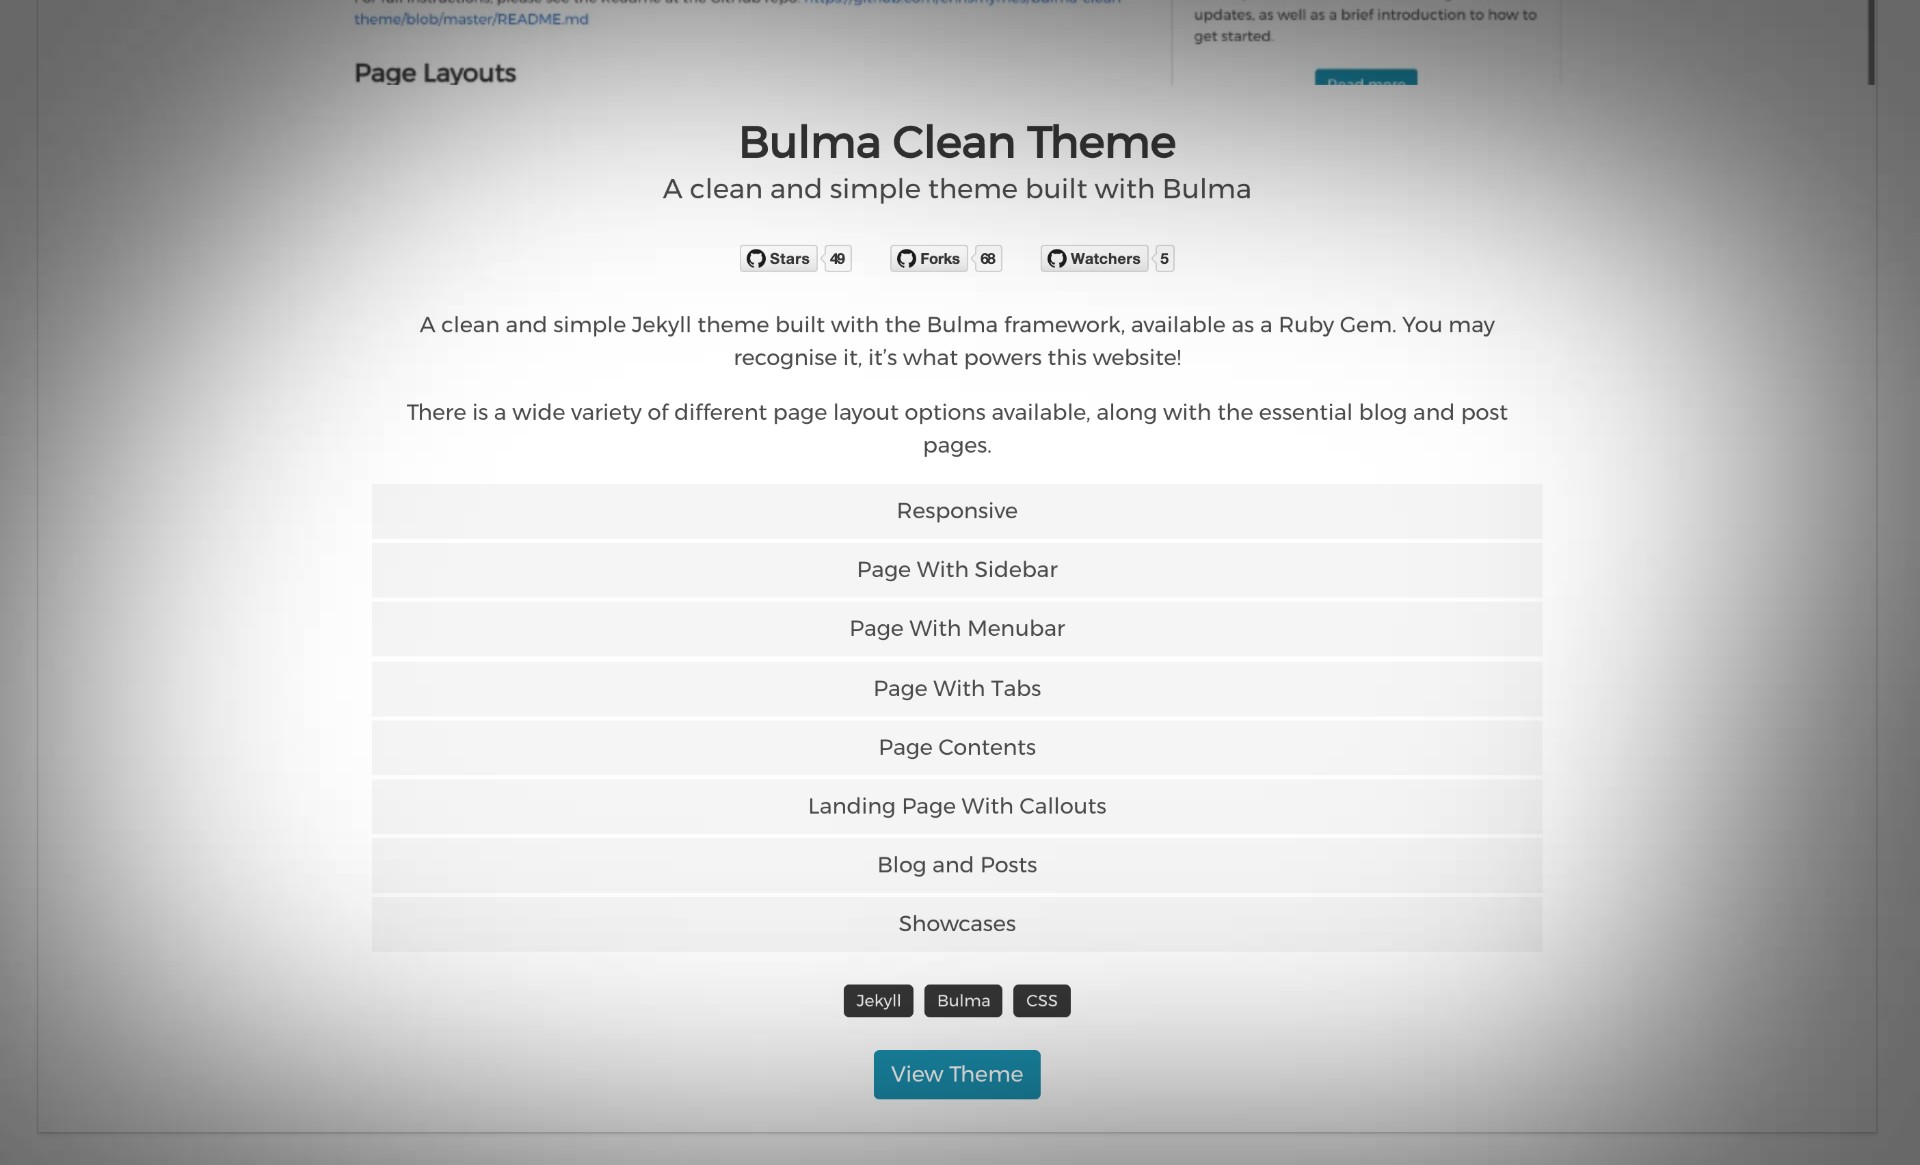 Lessons learned designing the Showcase layout for Bulma Clean Theme